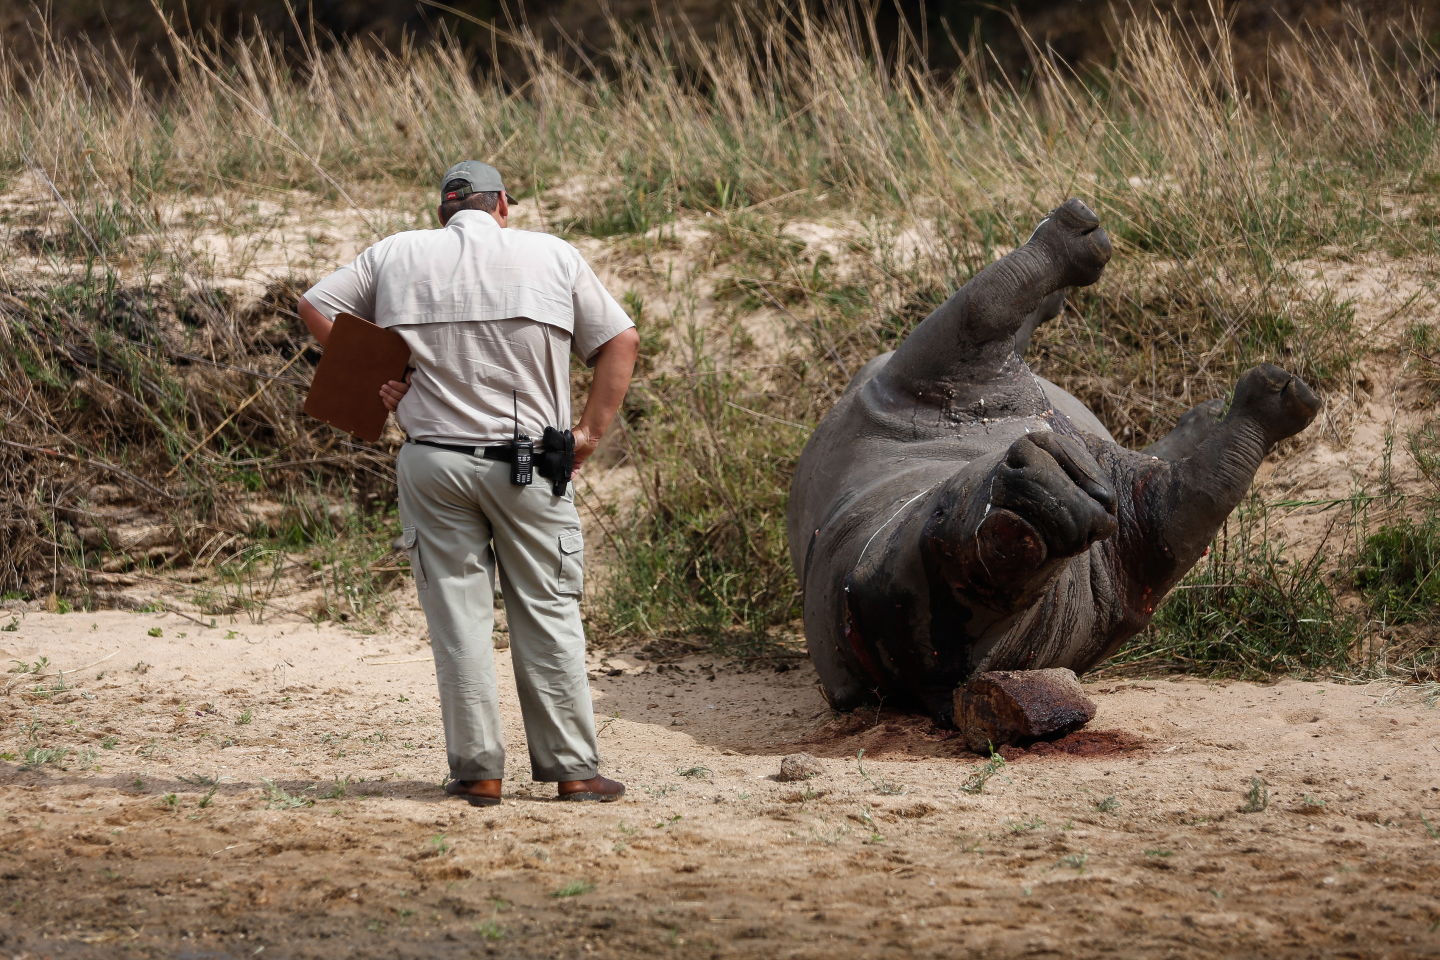 Crime scene investigator examines a poached rhino carcass in September 2014 in the Kruger National Park, South Africa. 